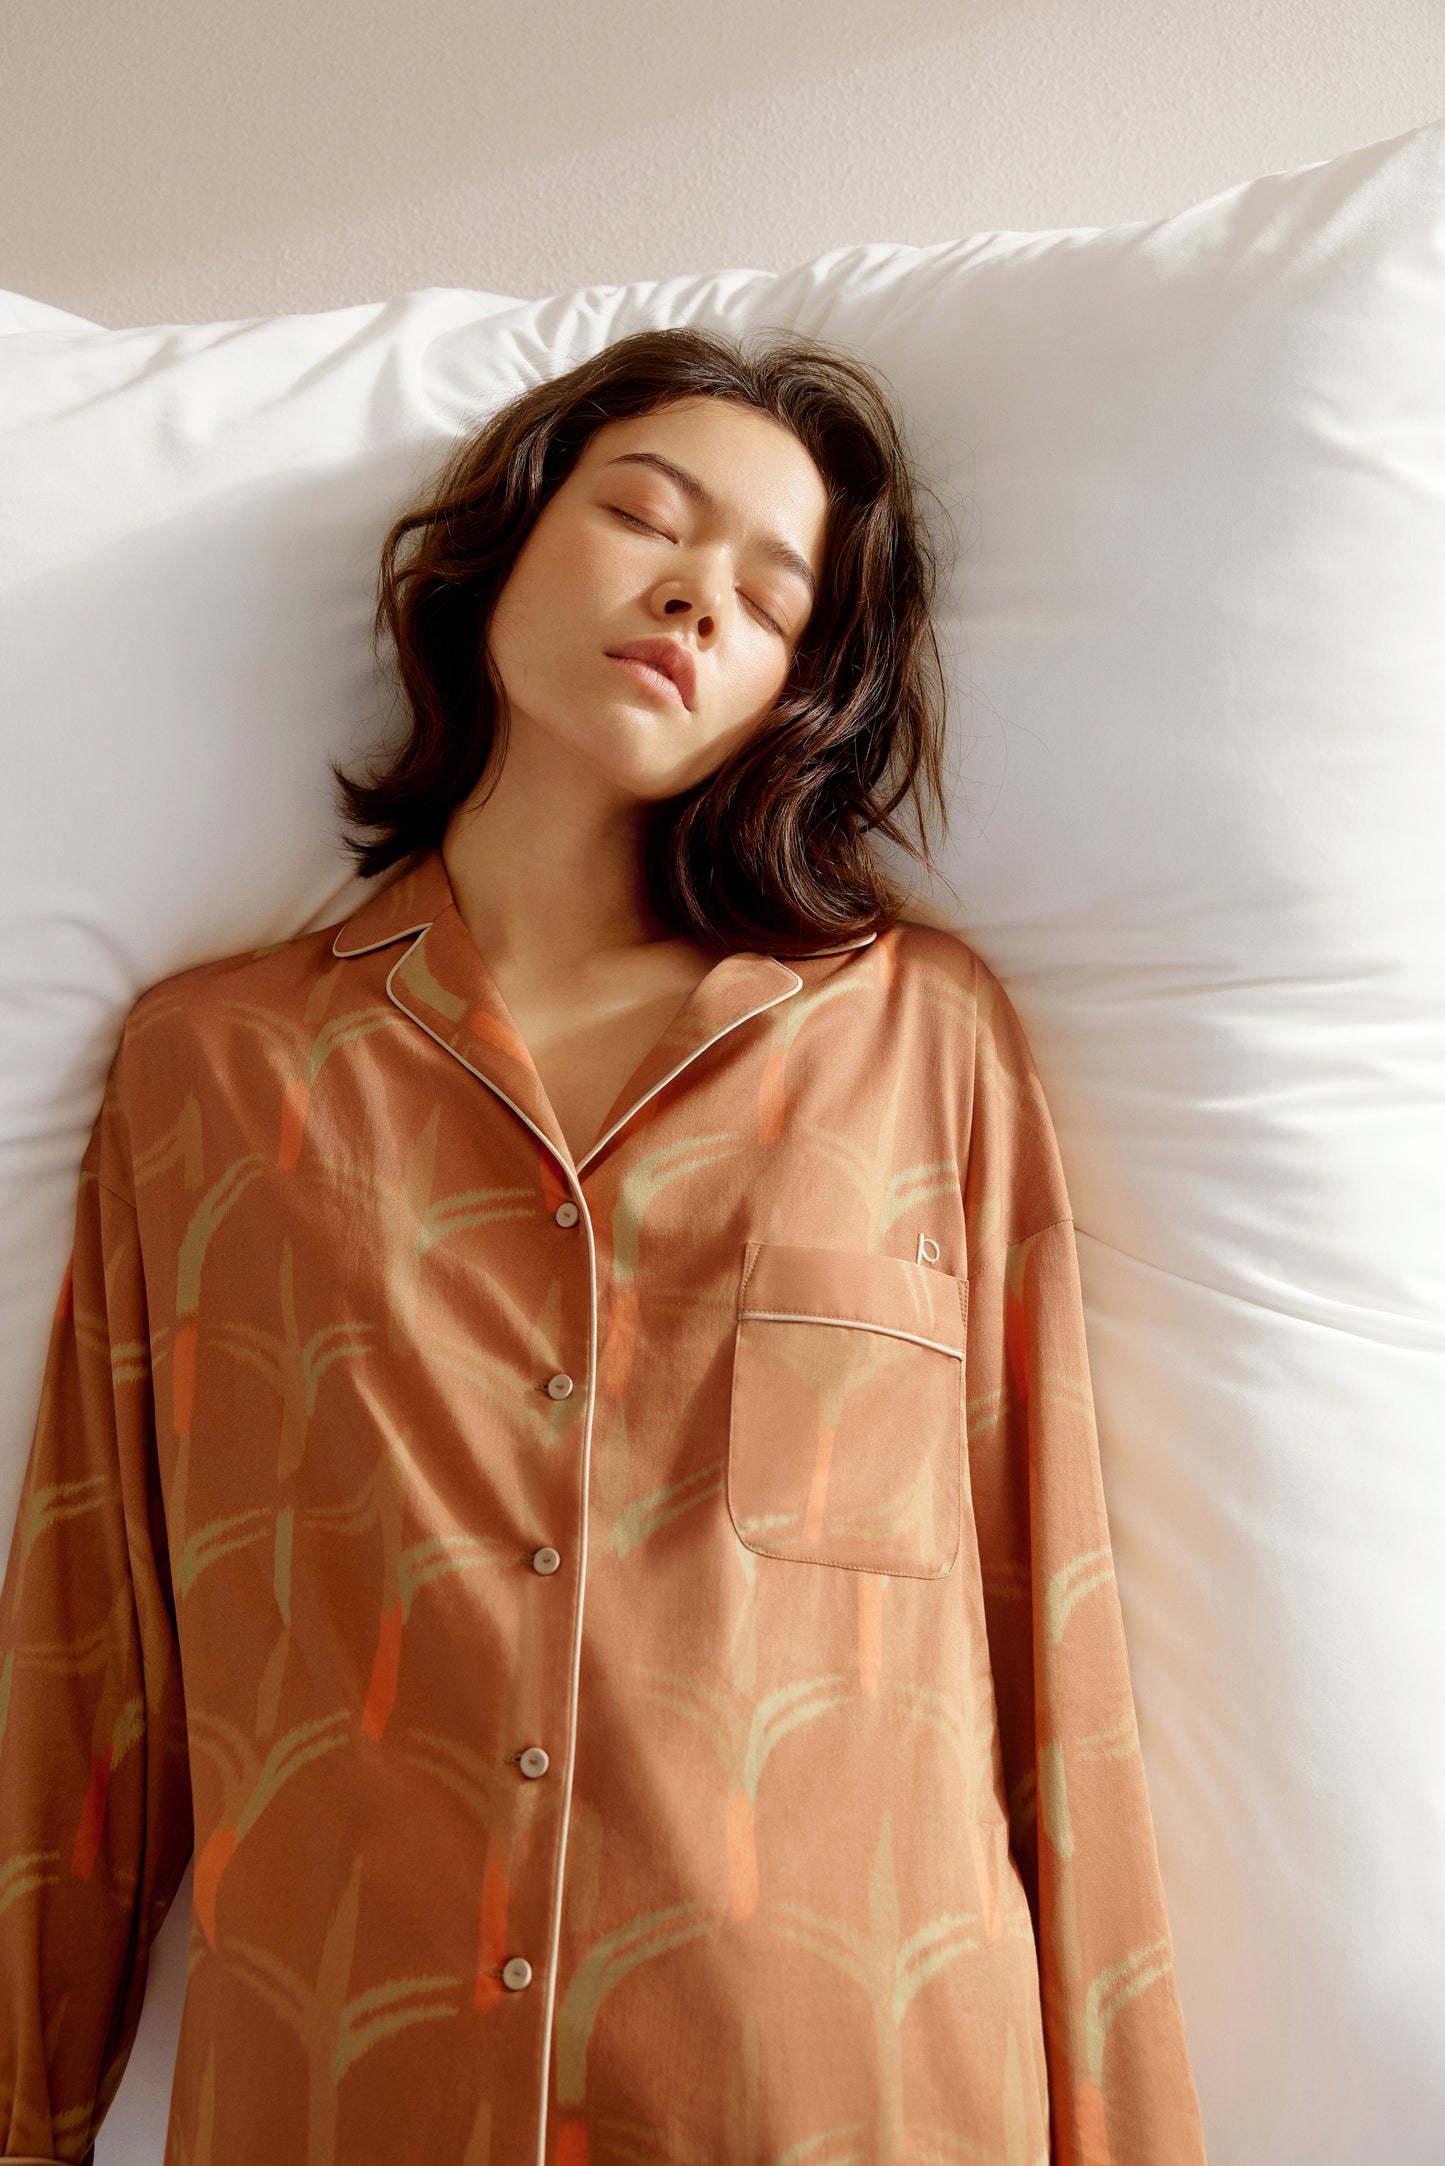 woman wearing button down brown color pajama top